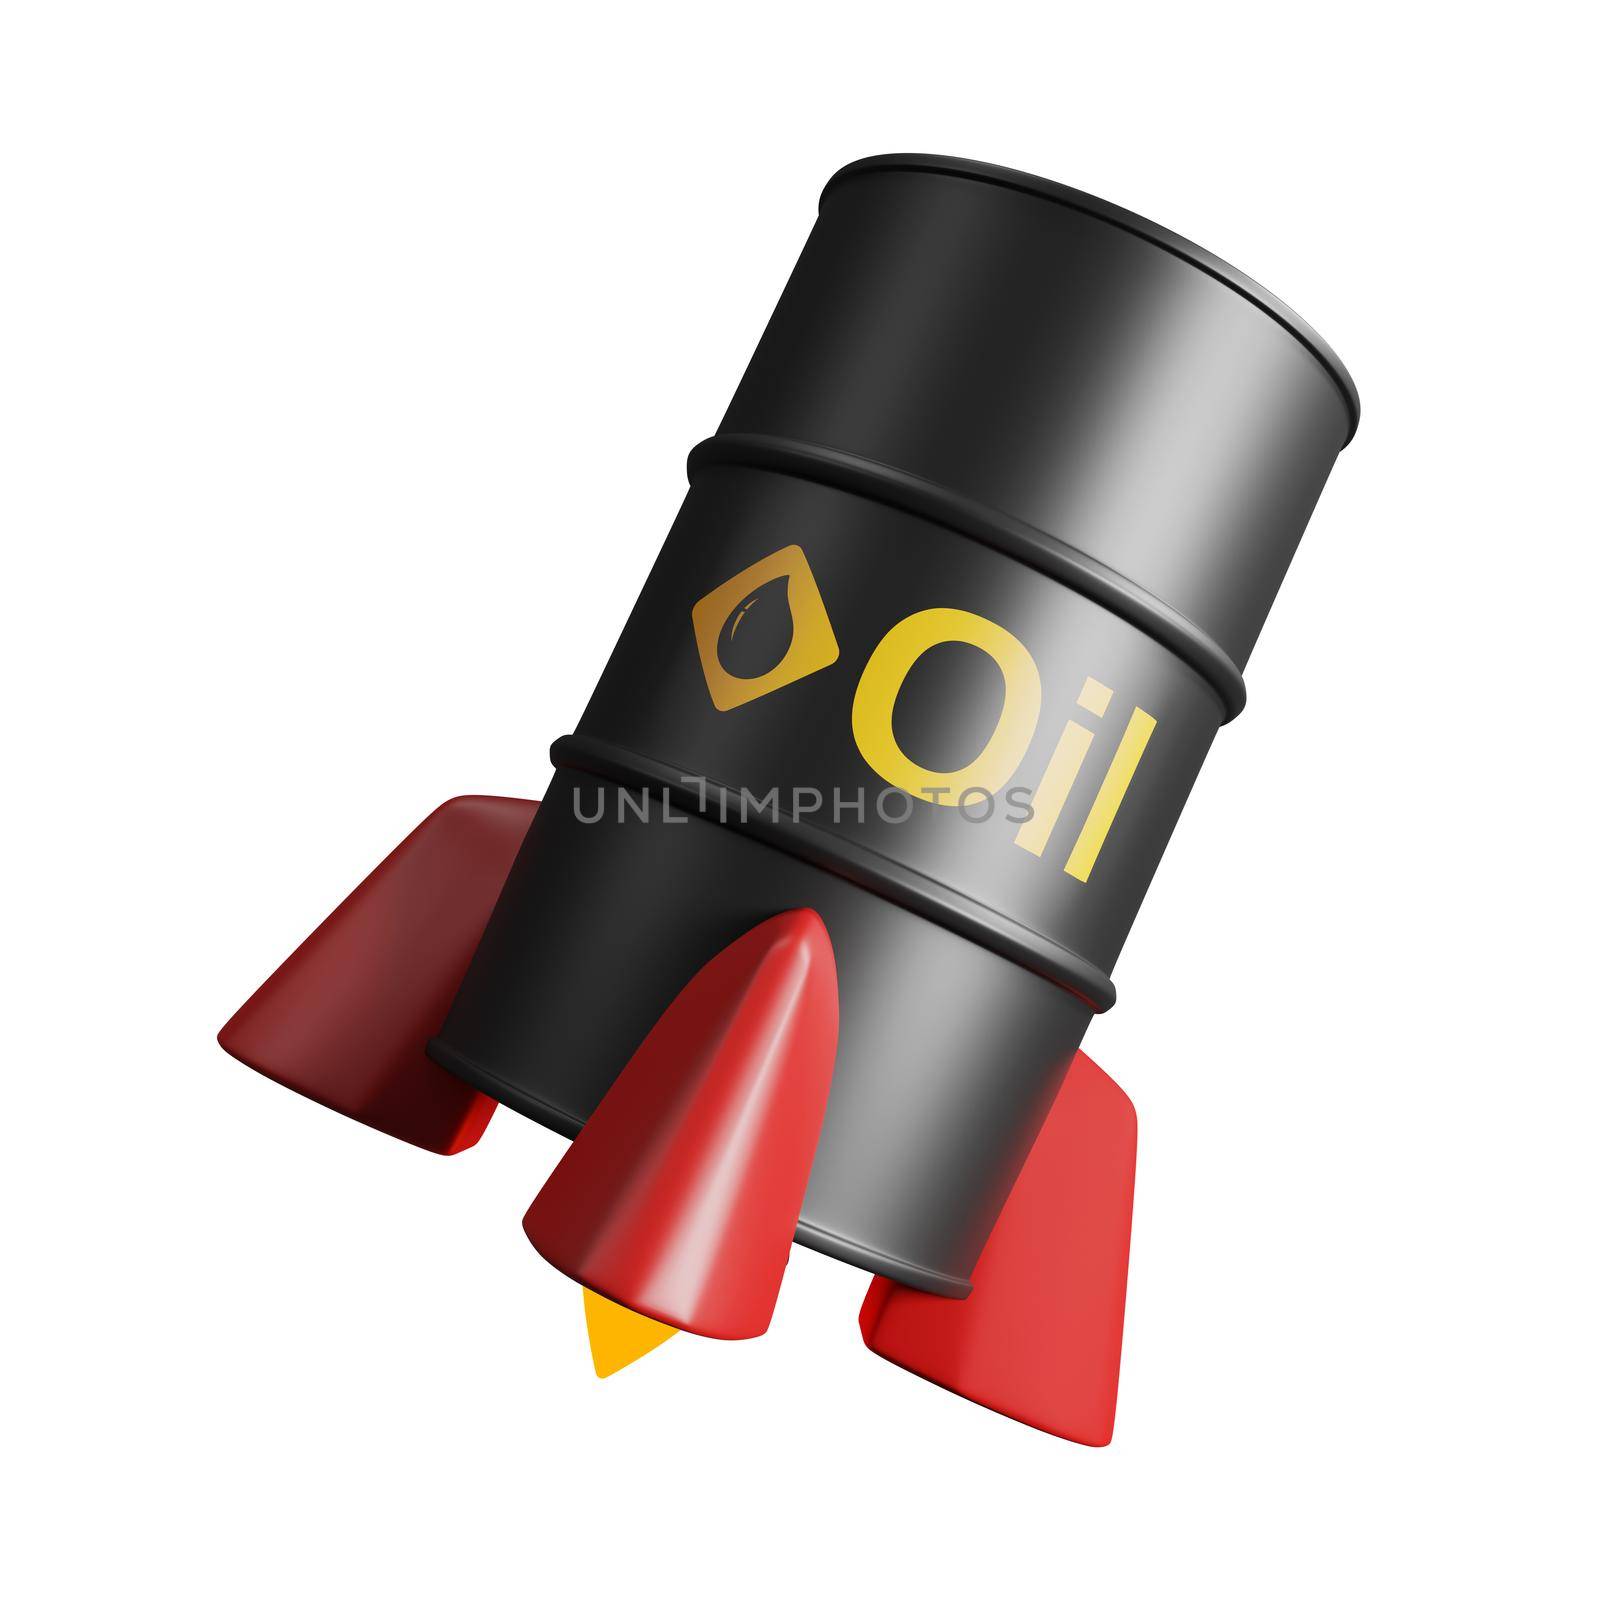 Crude oil price concept design of oil barrel rocket isolated on white background 3D render